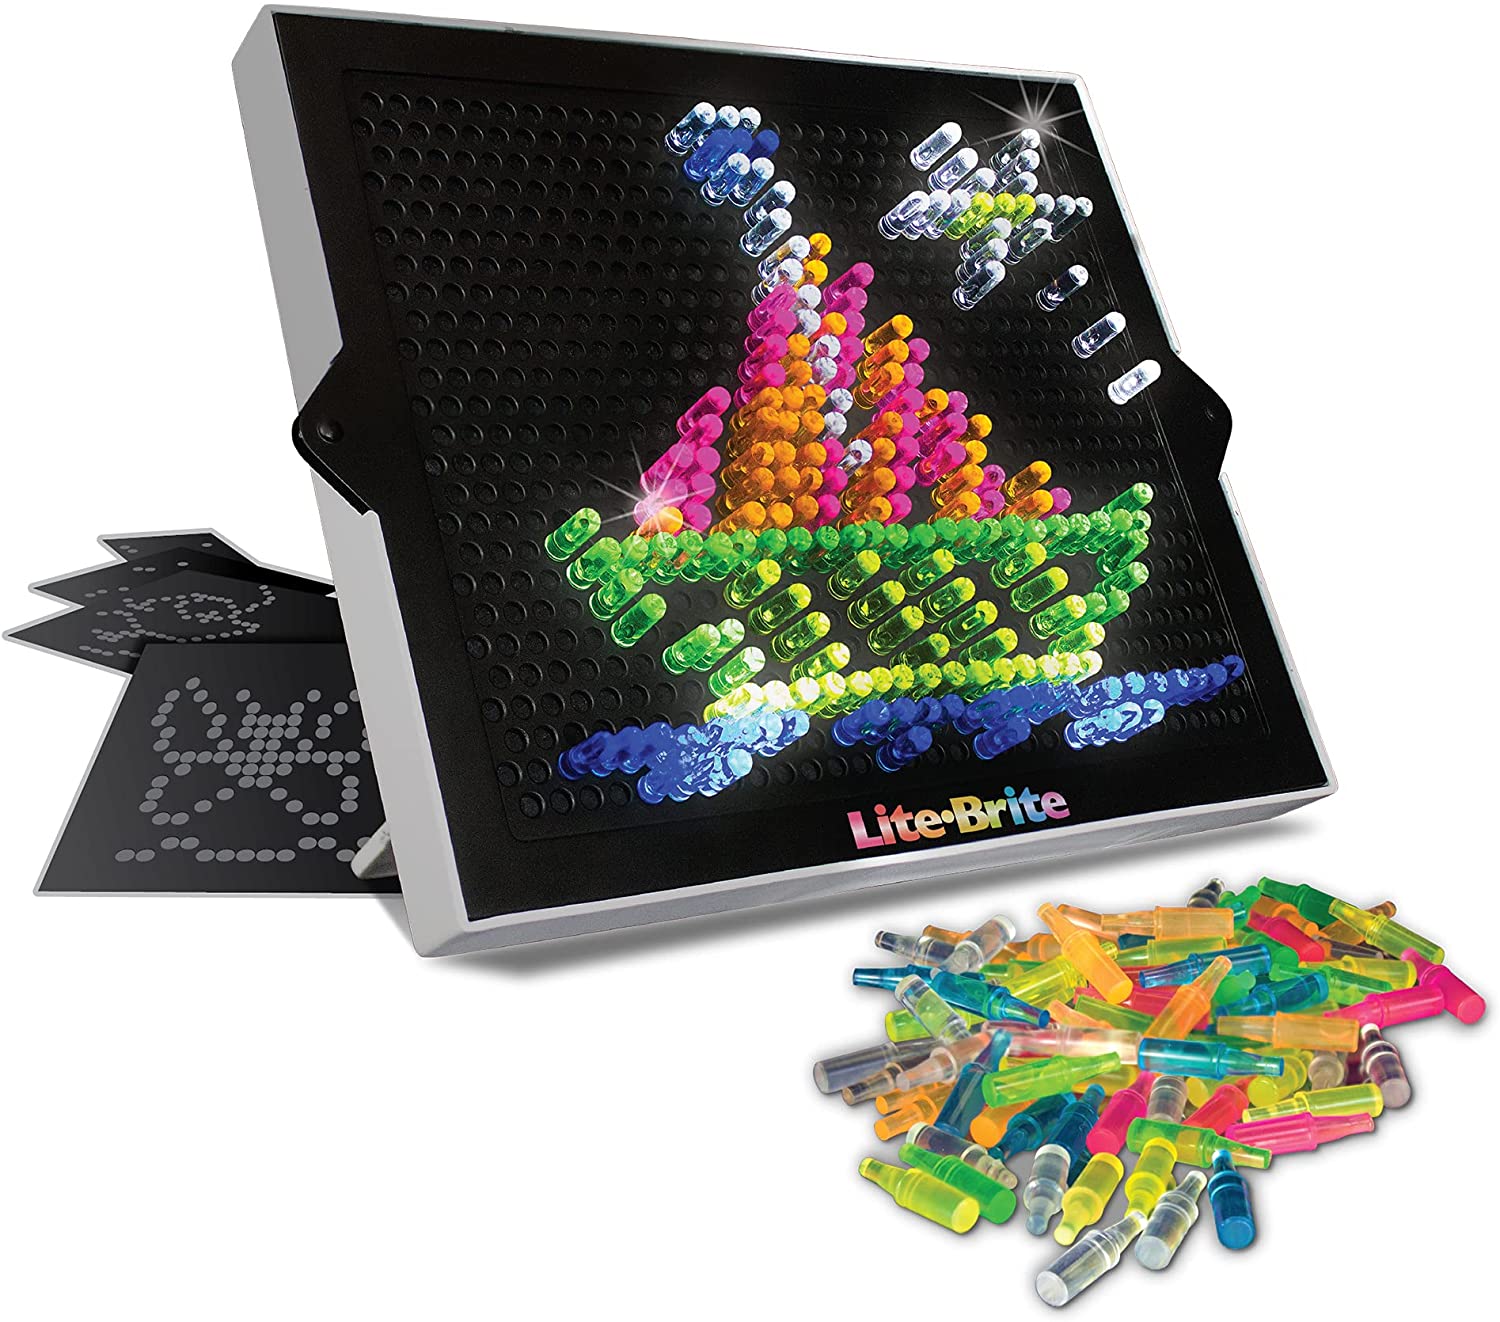 The Lite Brite with a lit-up sailboard on it. A pile of pegs and paper templates lie next to it.